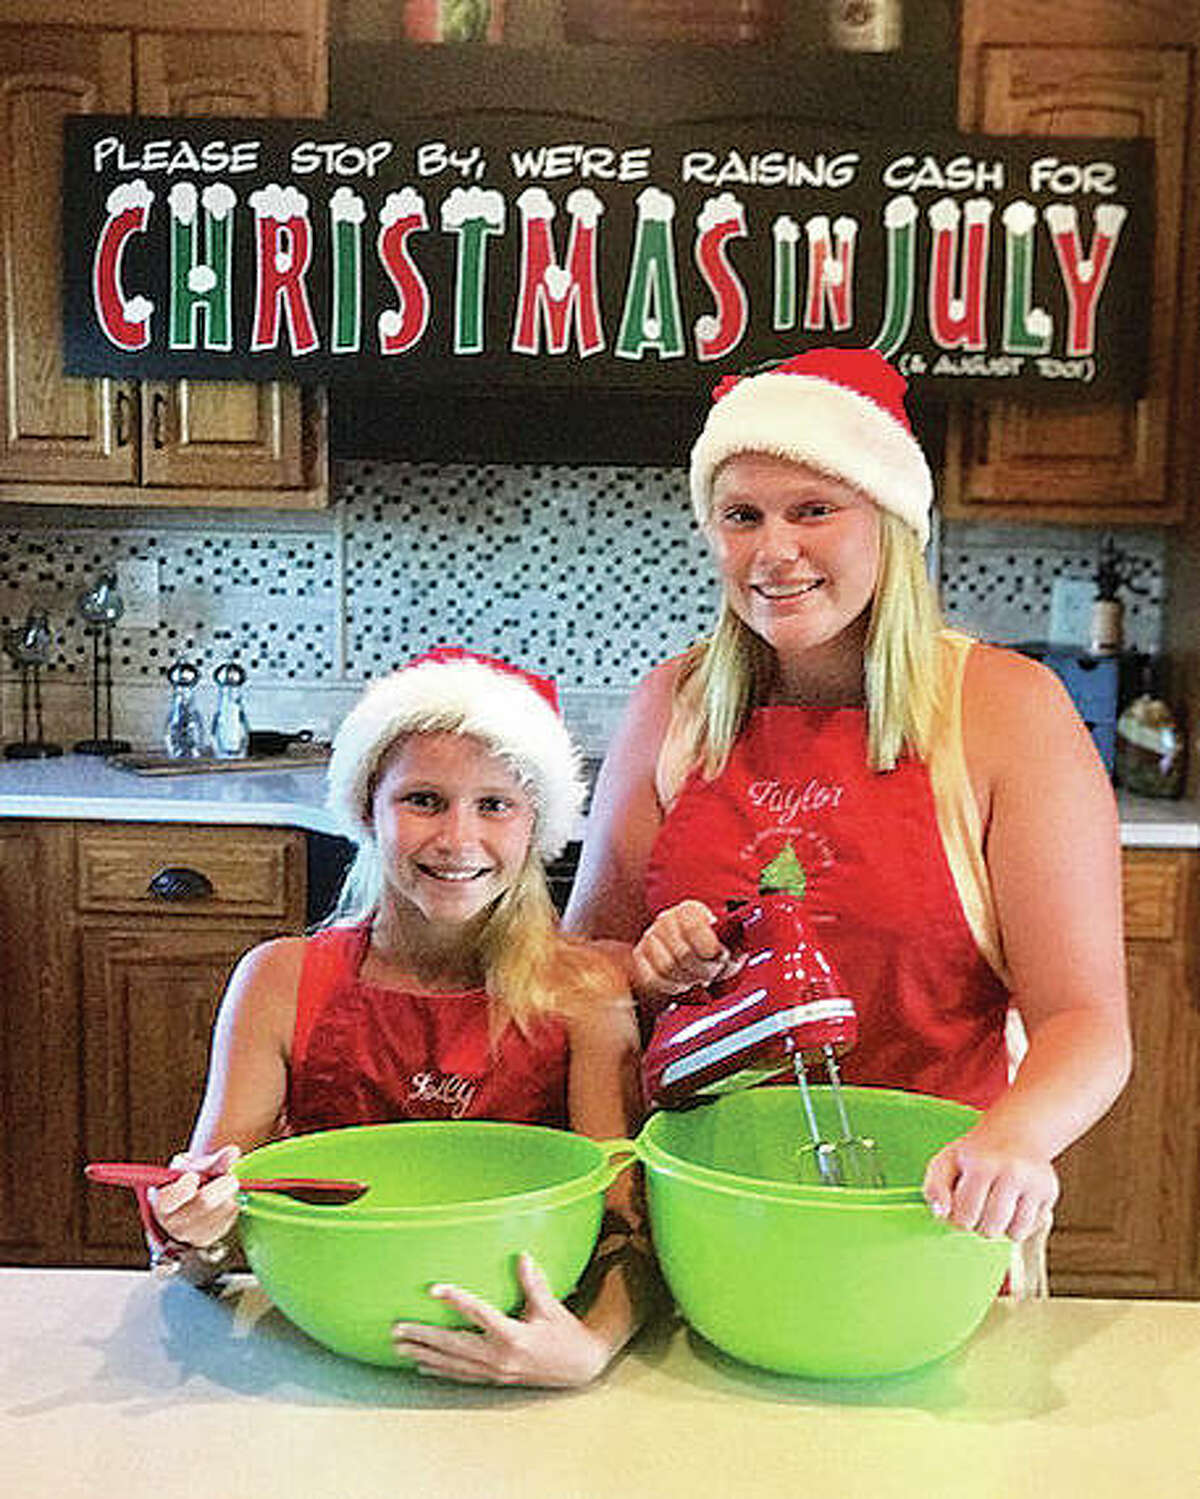 Taylor,13, and Lily Freer, 10, started the annual Christmas in July in 2009. Today, they continue hosting the event at their family business, Freer Auto Body, and are pictured while practicing making their “MawMaw” Margaret Freer’s cheesecake to serve Friday at this year’s event.